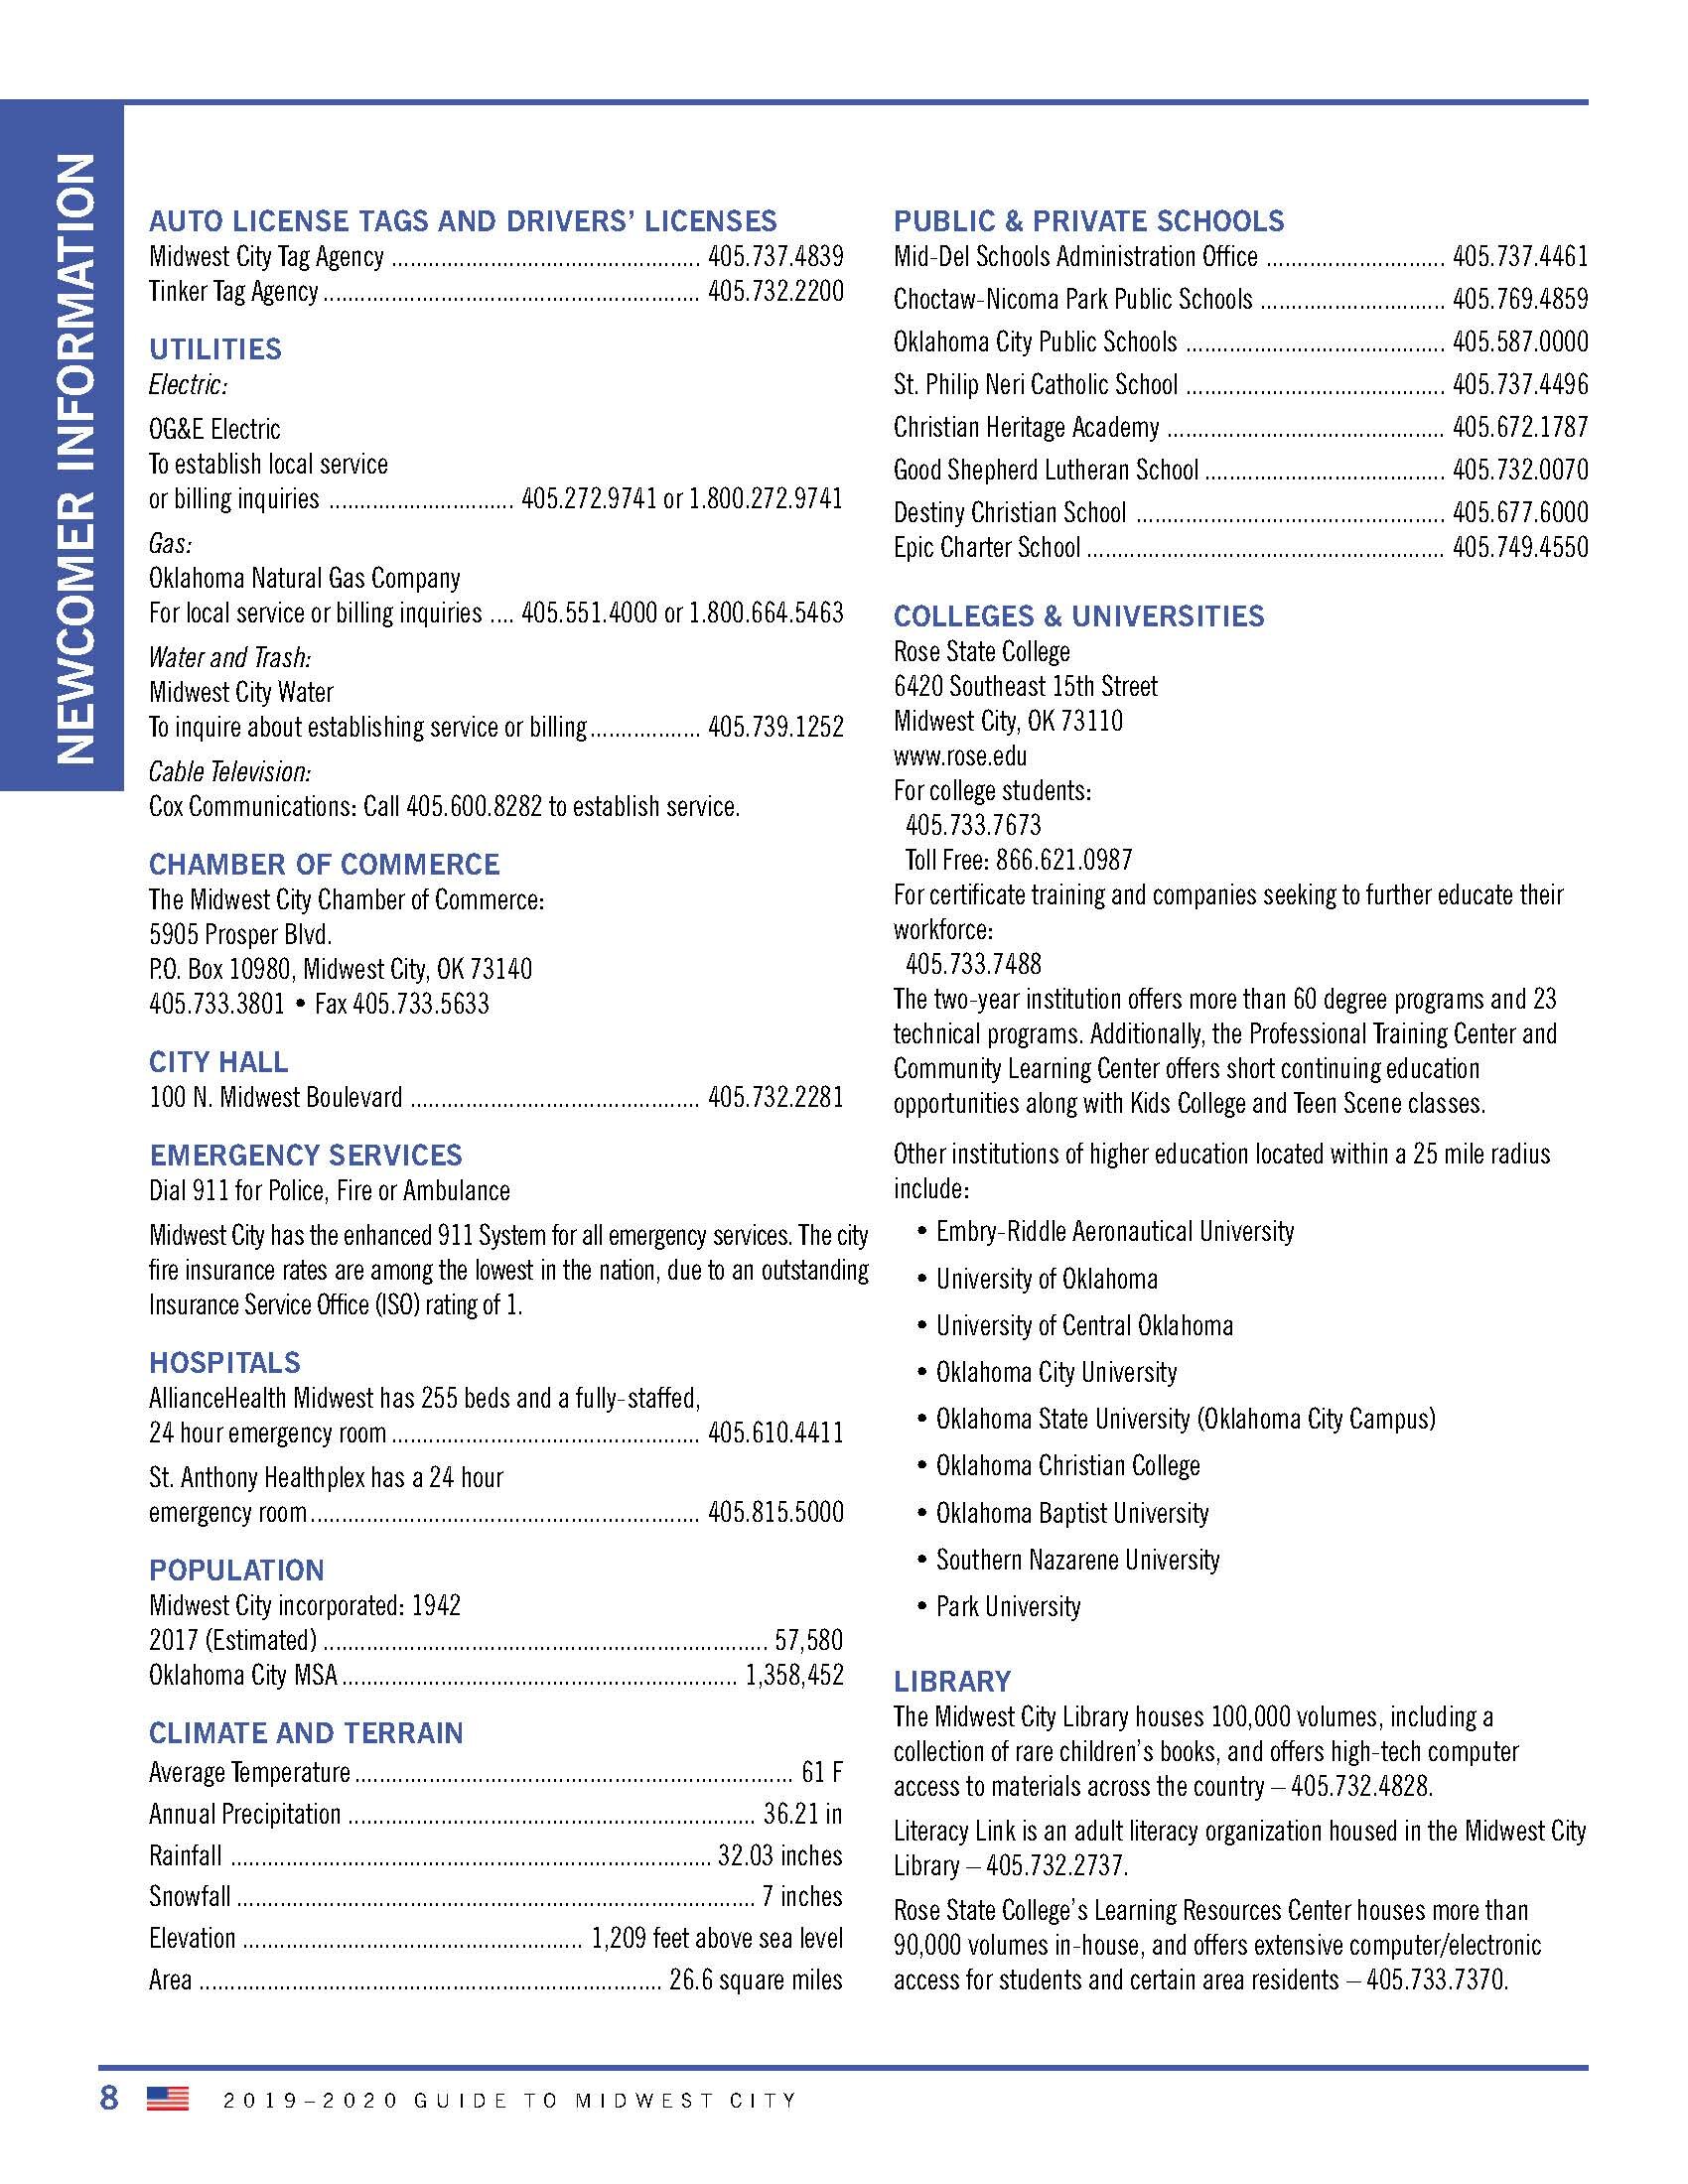 2019MWCChamberGuide_Proof06_Page_10.jpg